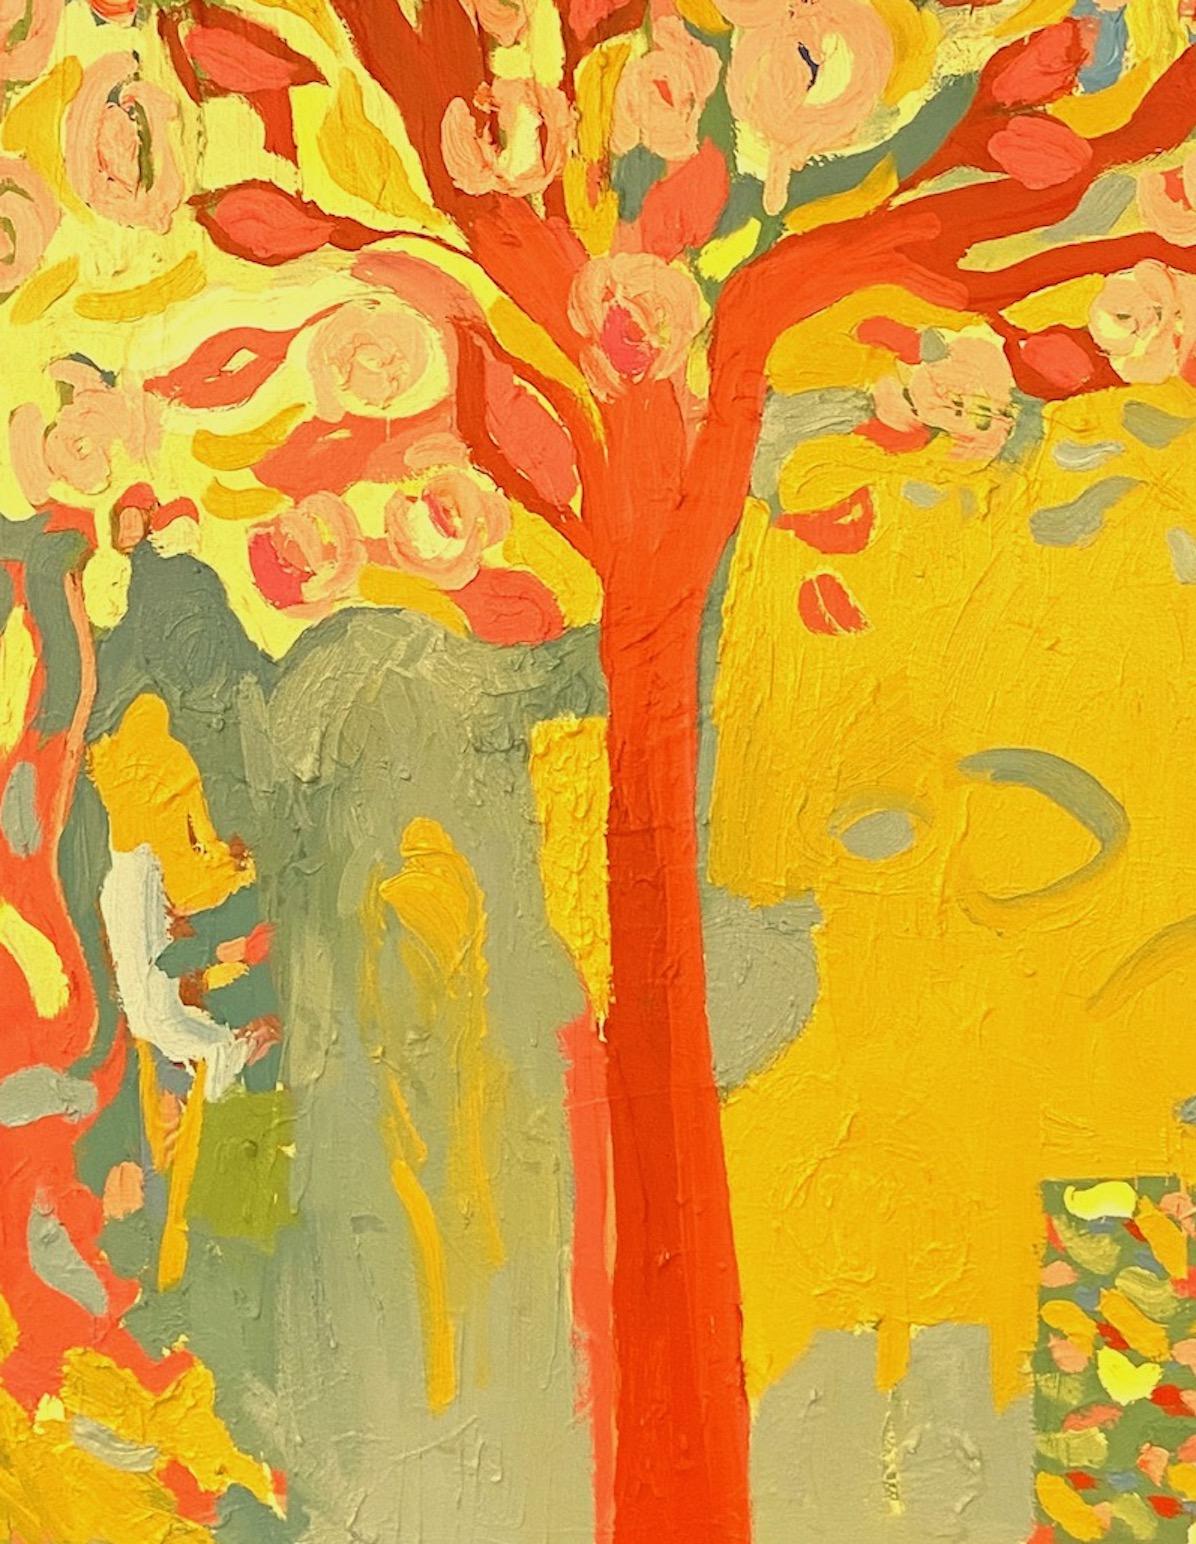 Camellia Tree, Contemporary Expressionist Oil Painting - Yellow Landscape Painting by Paul wadsworth